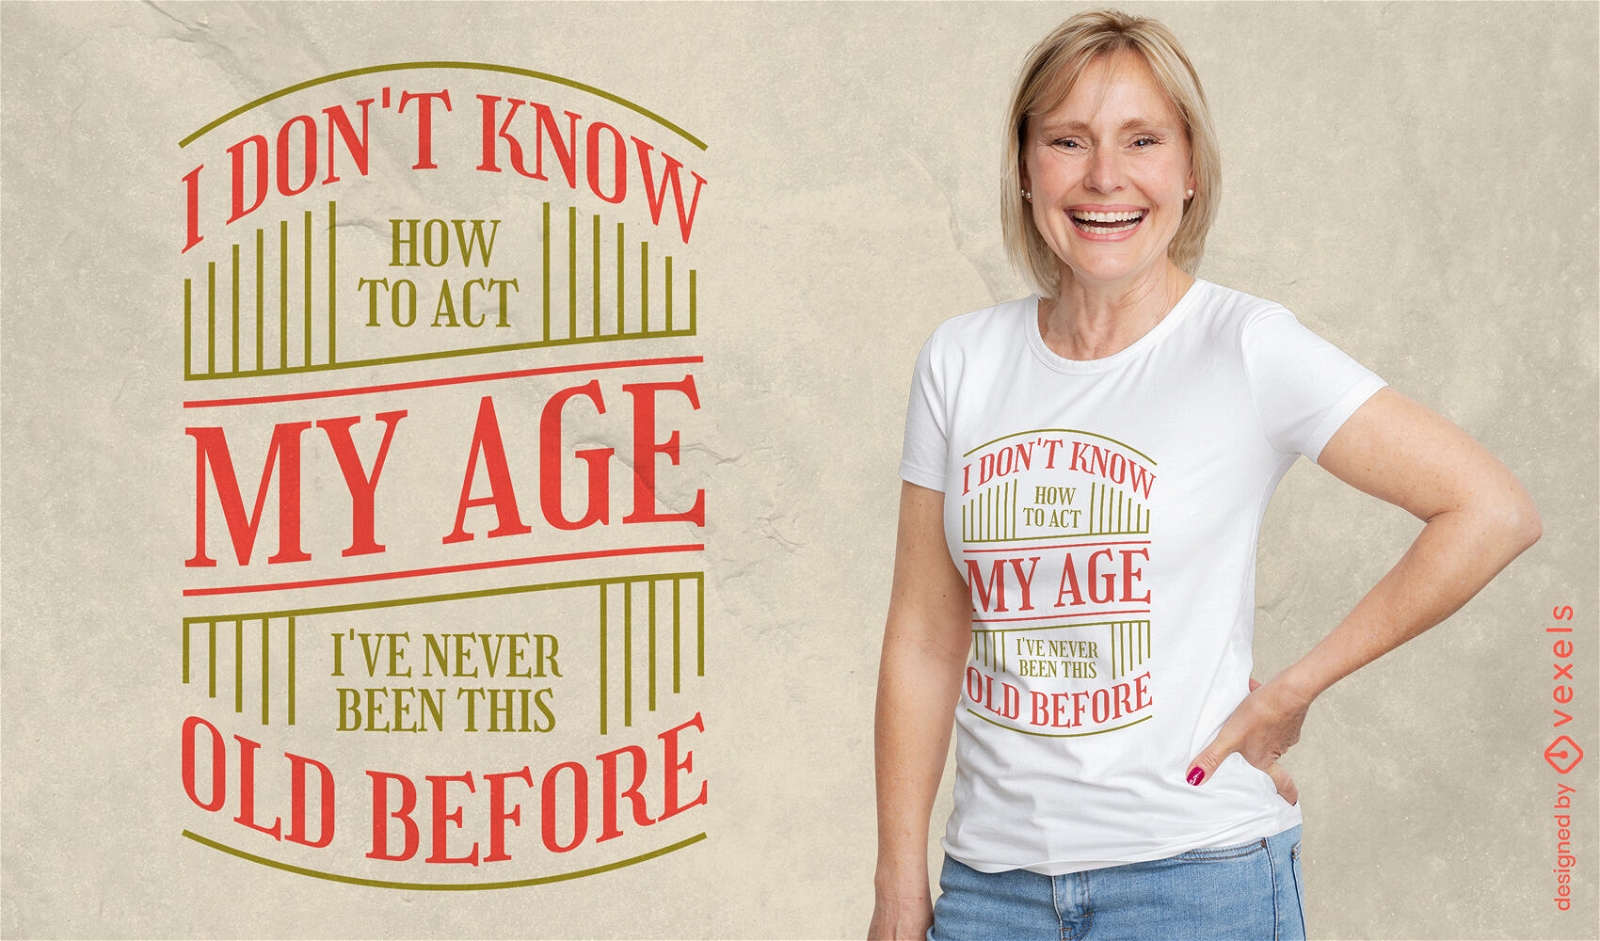 Act my age funny quote t-shirt design